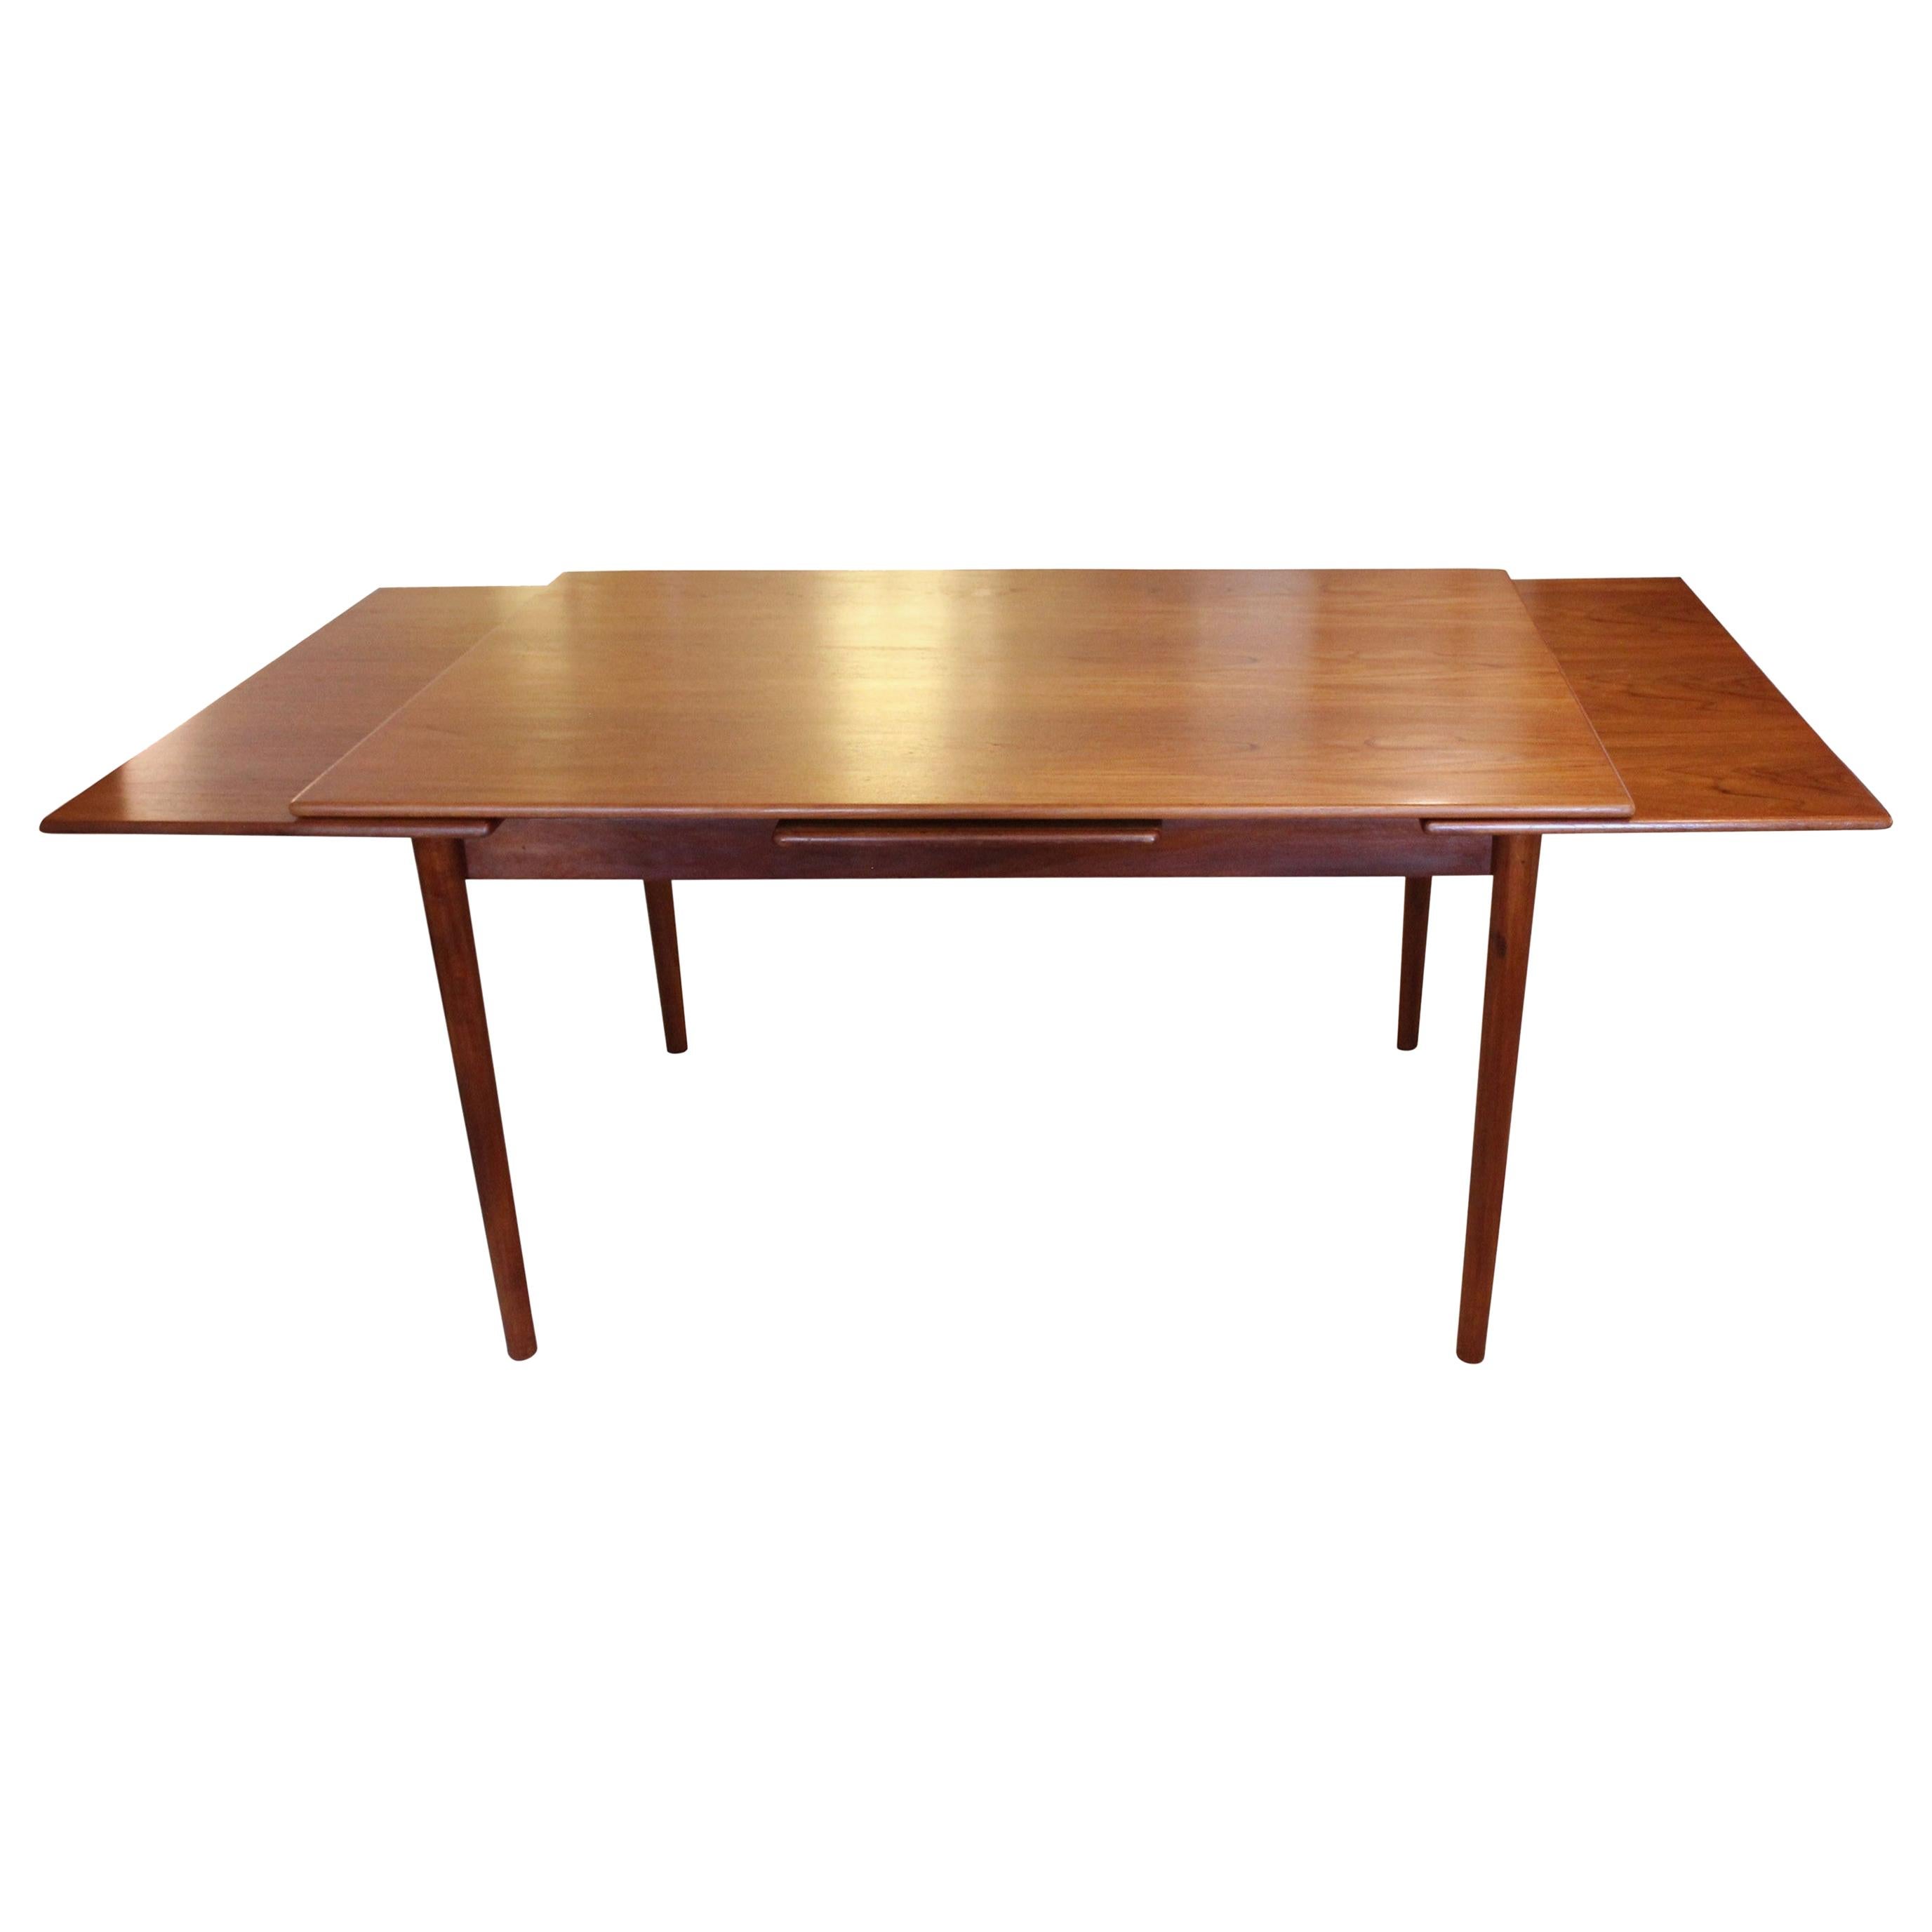 Dining Table with Extentions in Teak of Danish Design from the 1960s For Sale